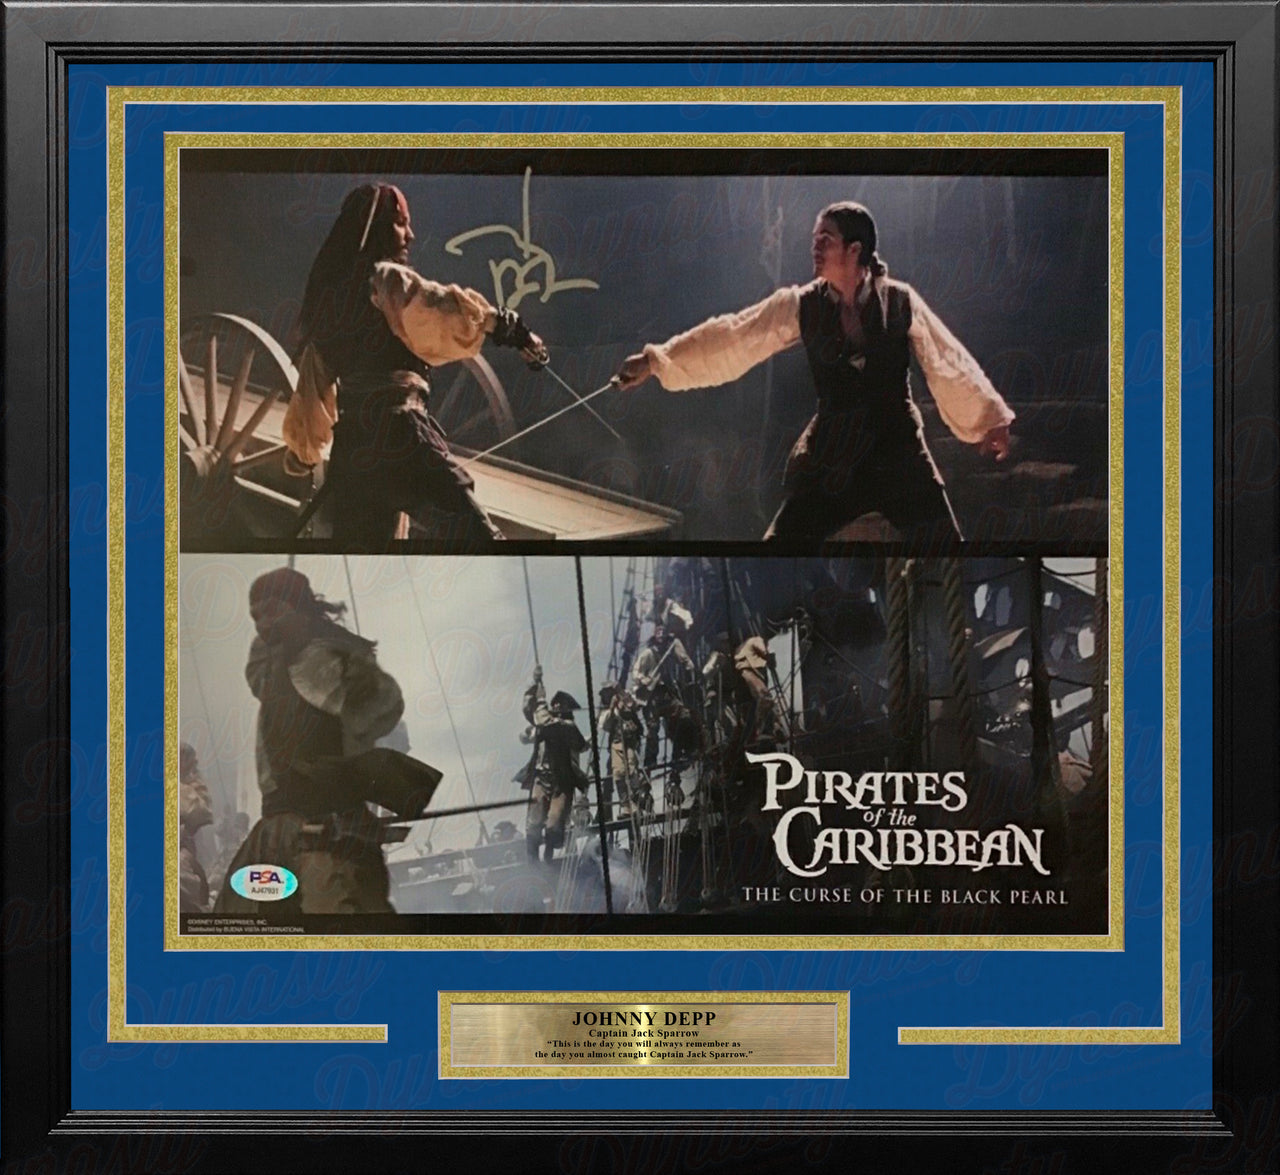 Johnny Depp Autographed Pirates of the Caribbean 11" x 14" Framed Collage Photo - Dynasty Sports & Framing 